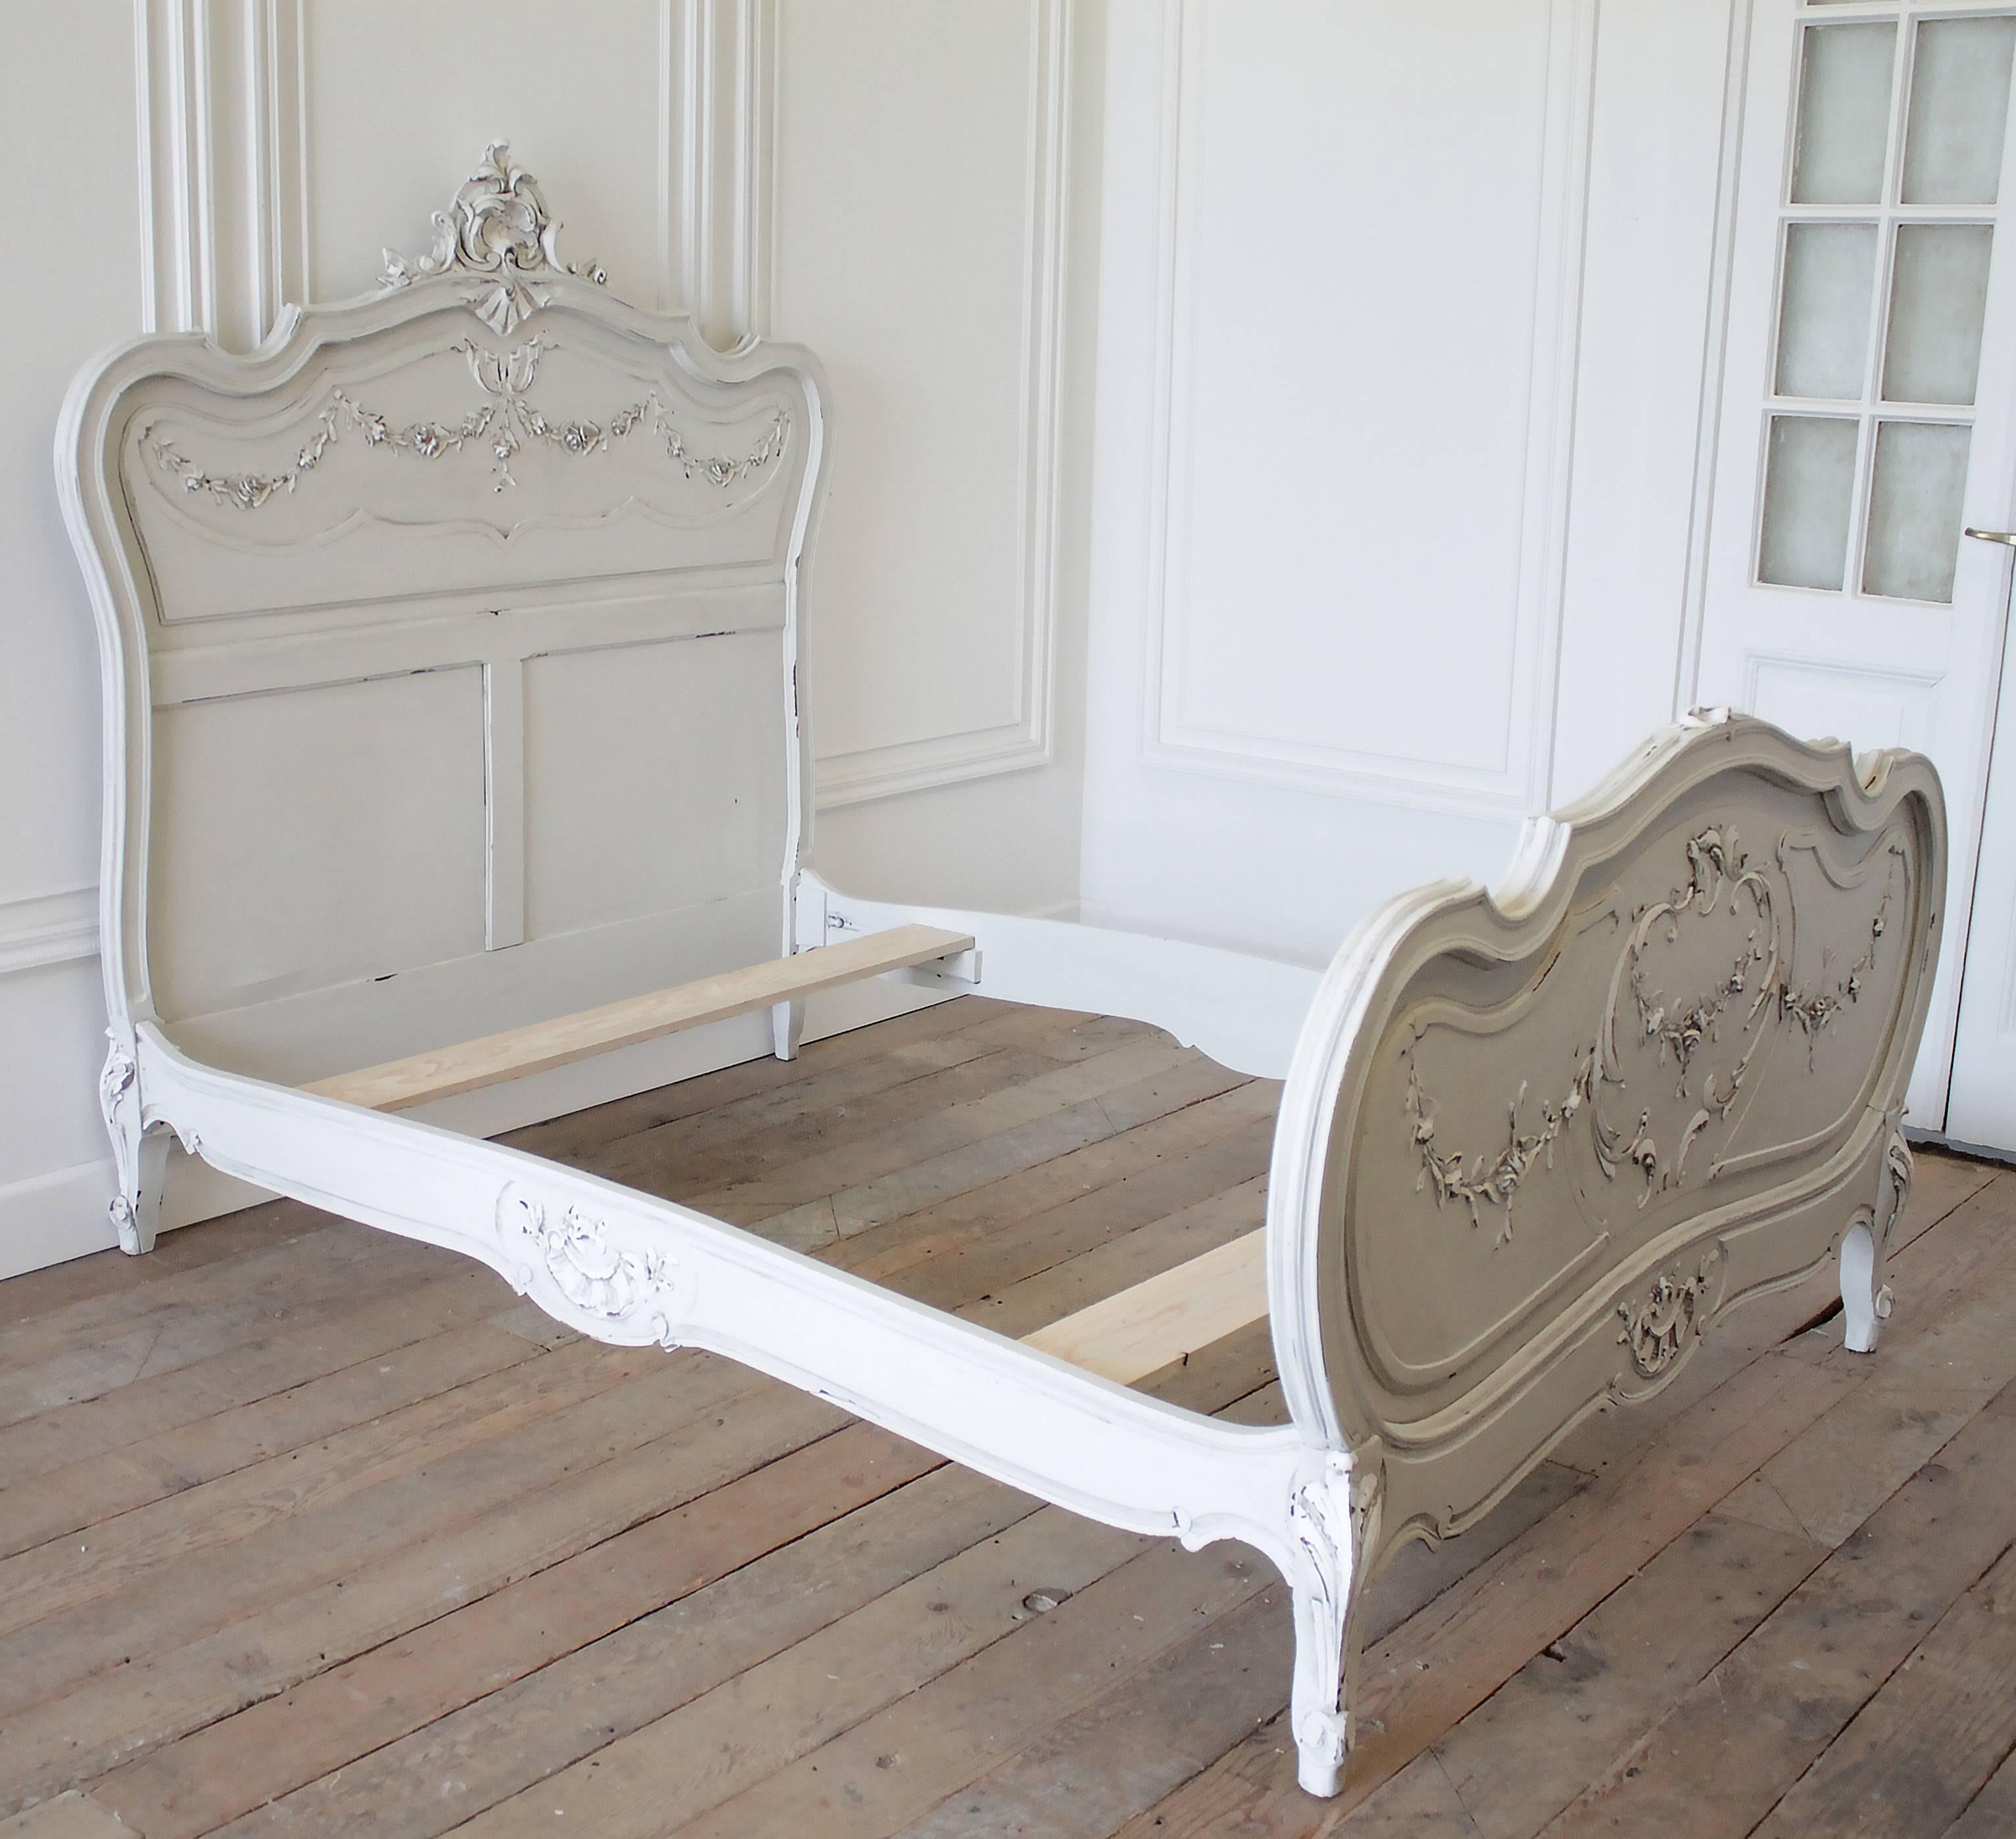 Classic Louis XV style Rococo bed has been painted in our oyster white, with soft white detailing. Finished with a slight distress, and antique glaze to give a time worn patina. The headboard has a large carved cartouche with large carved rose's